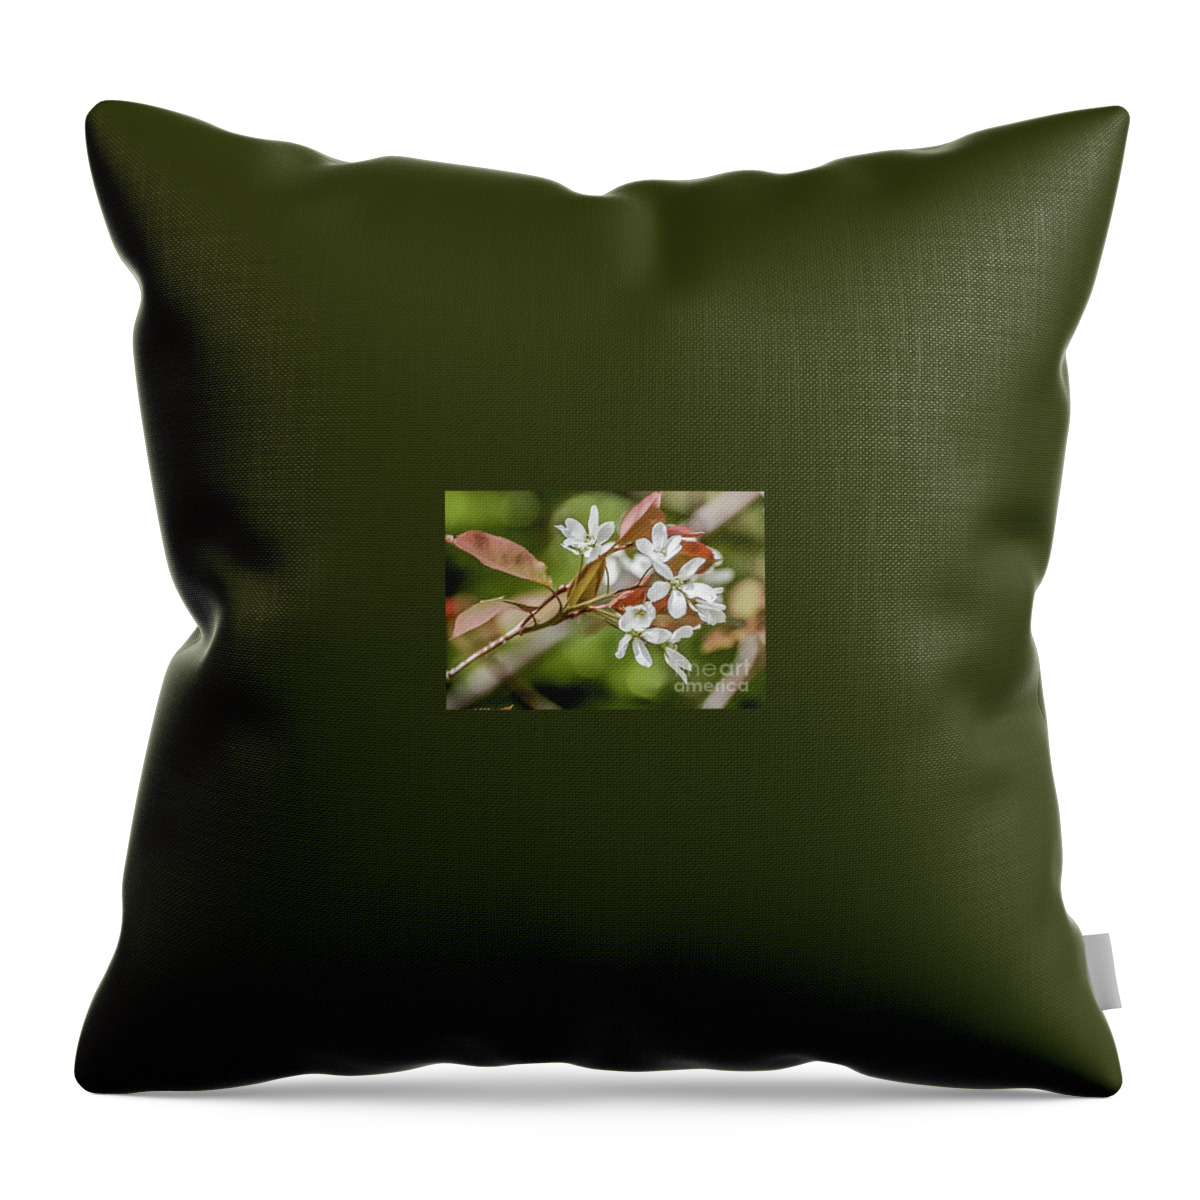 Flowers Throw Pillow featuring the photograph White Spring Flowers by Marie Fortin